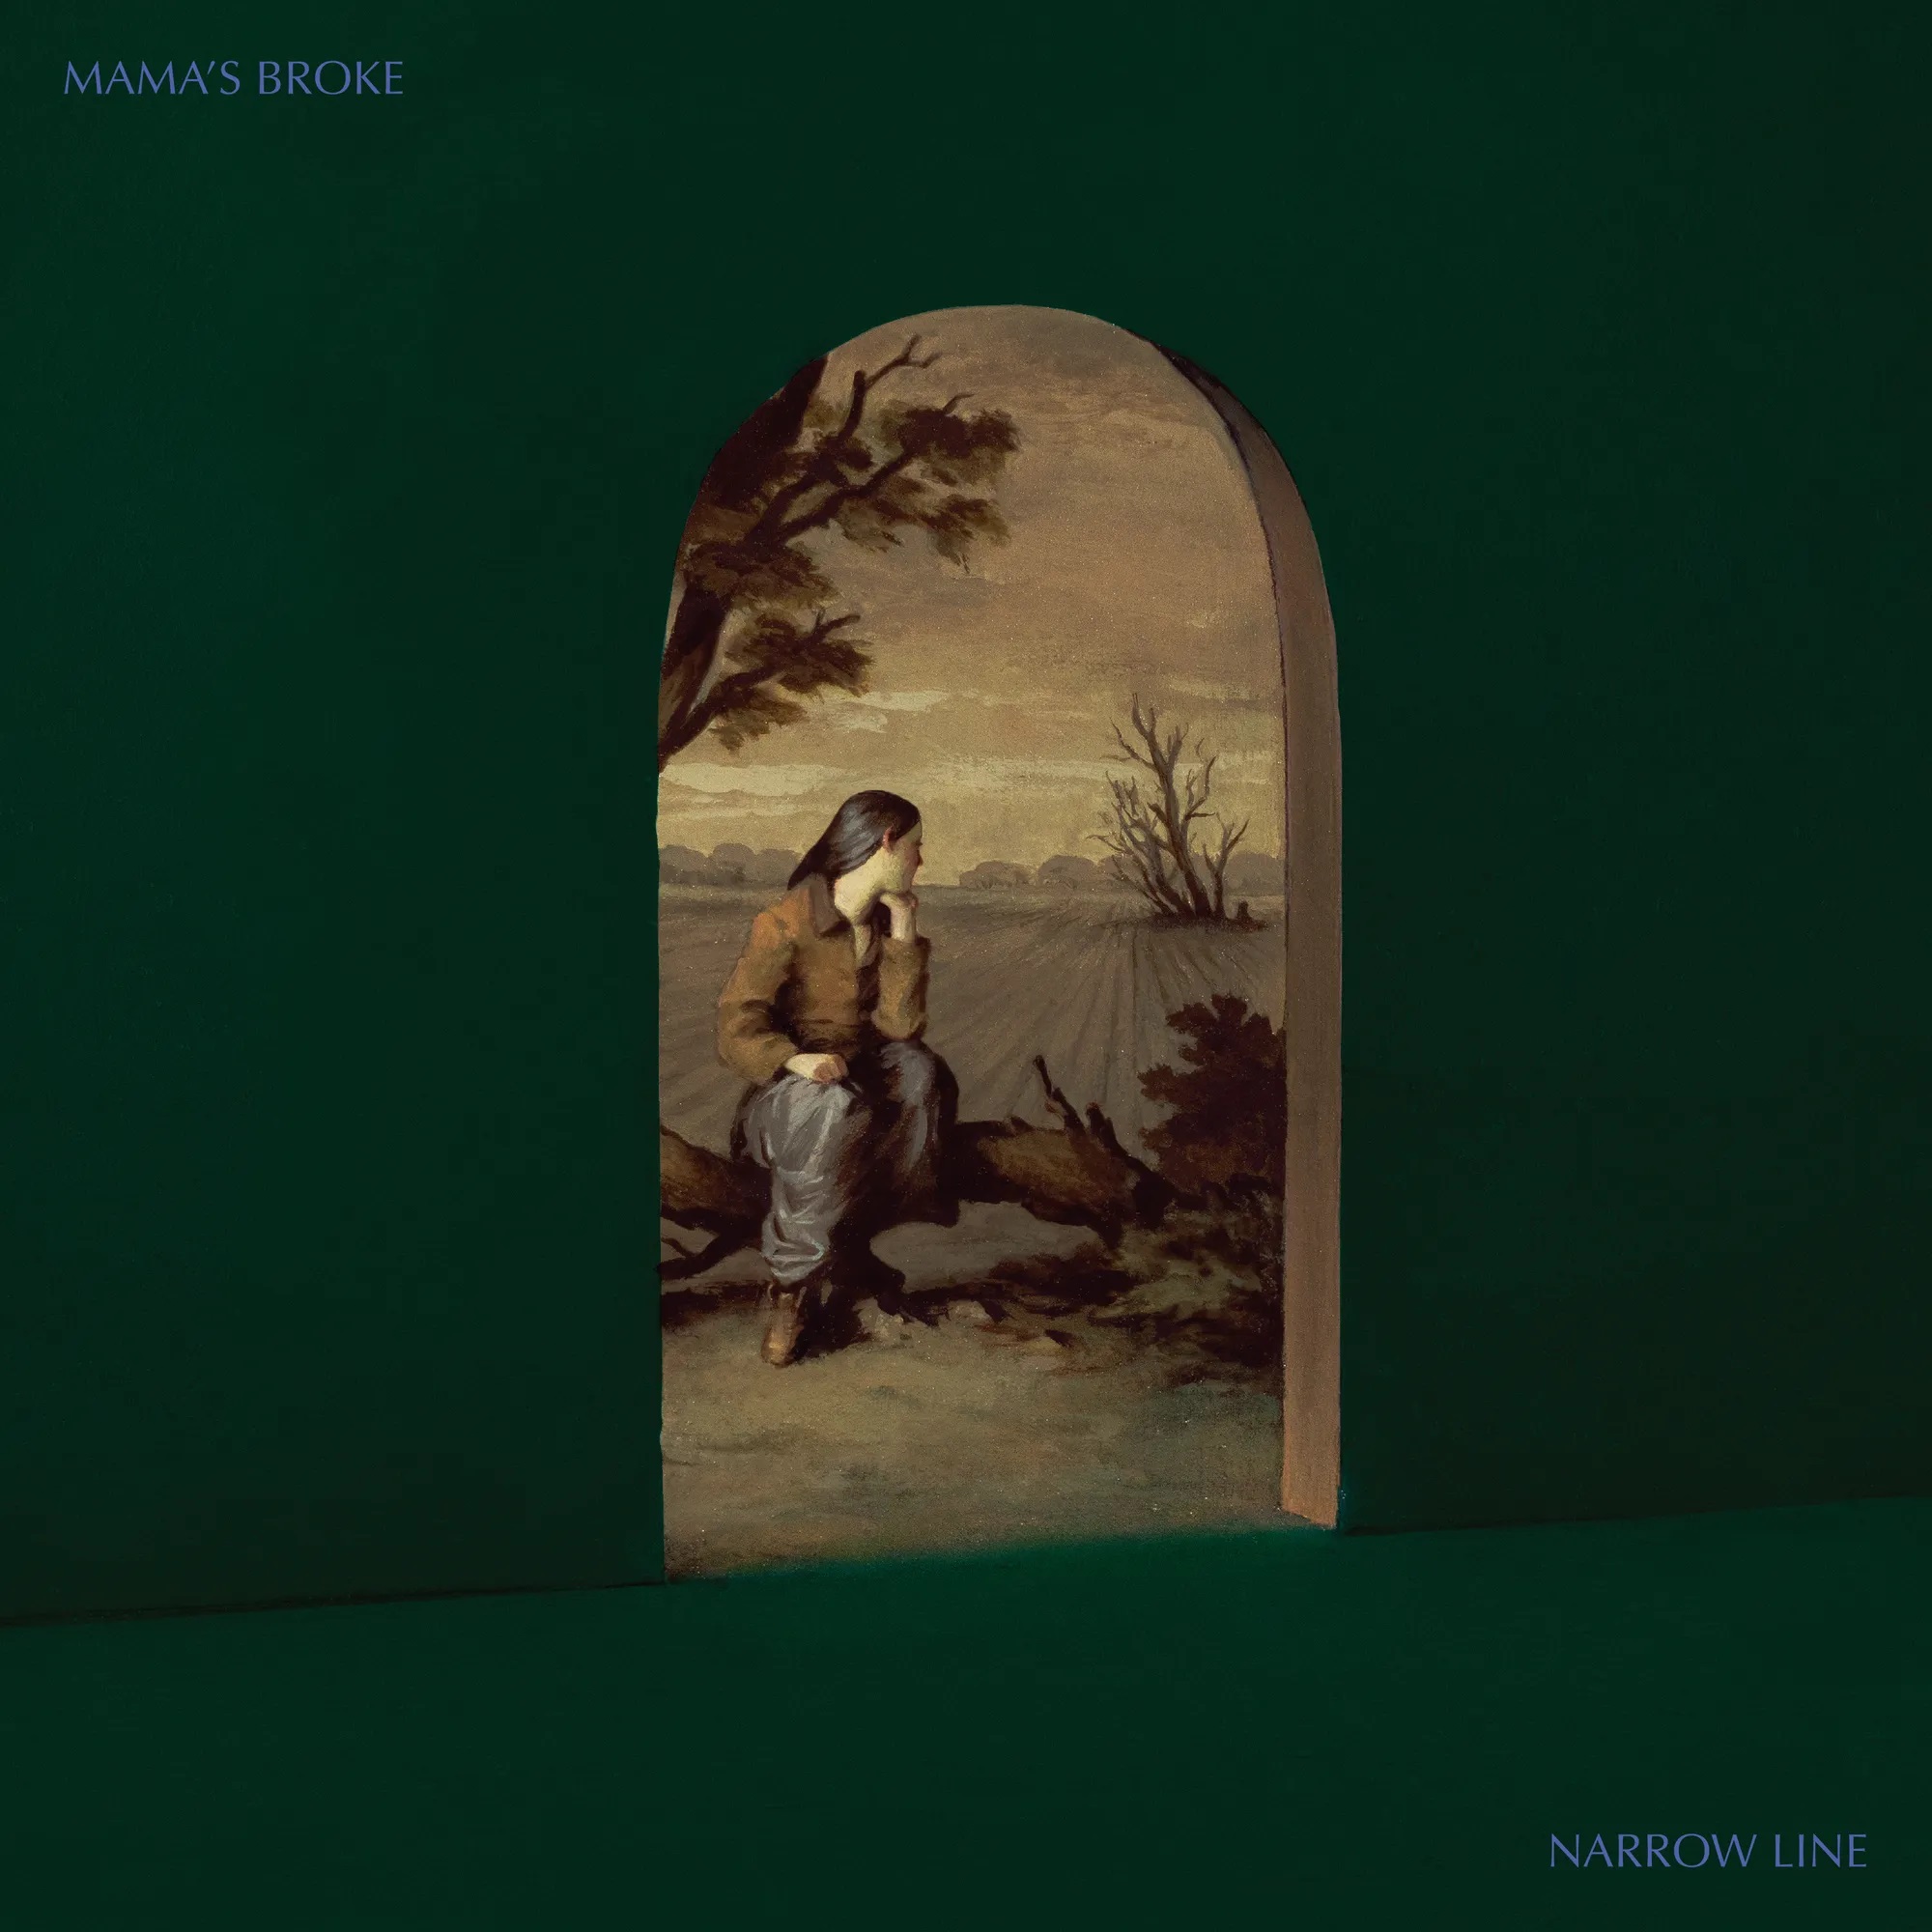 Indie roots duo Mama's Broke have new album coming Fri May 13